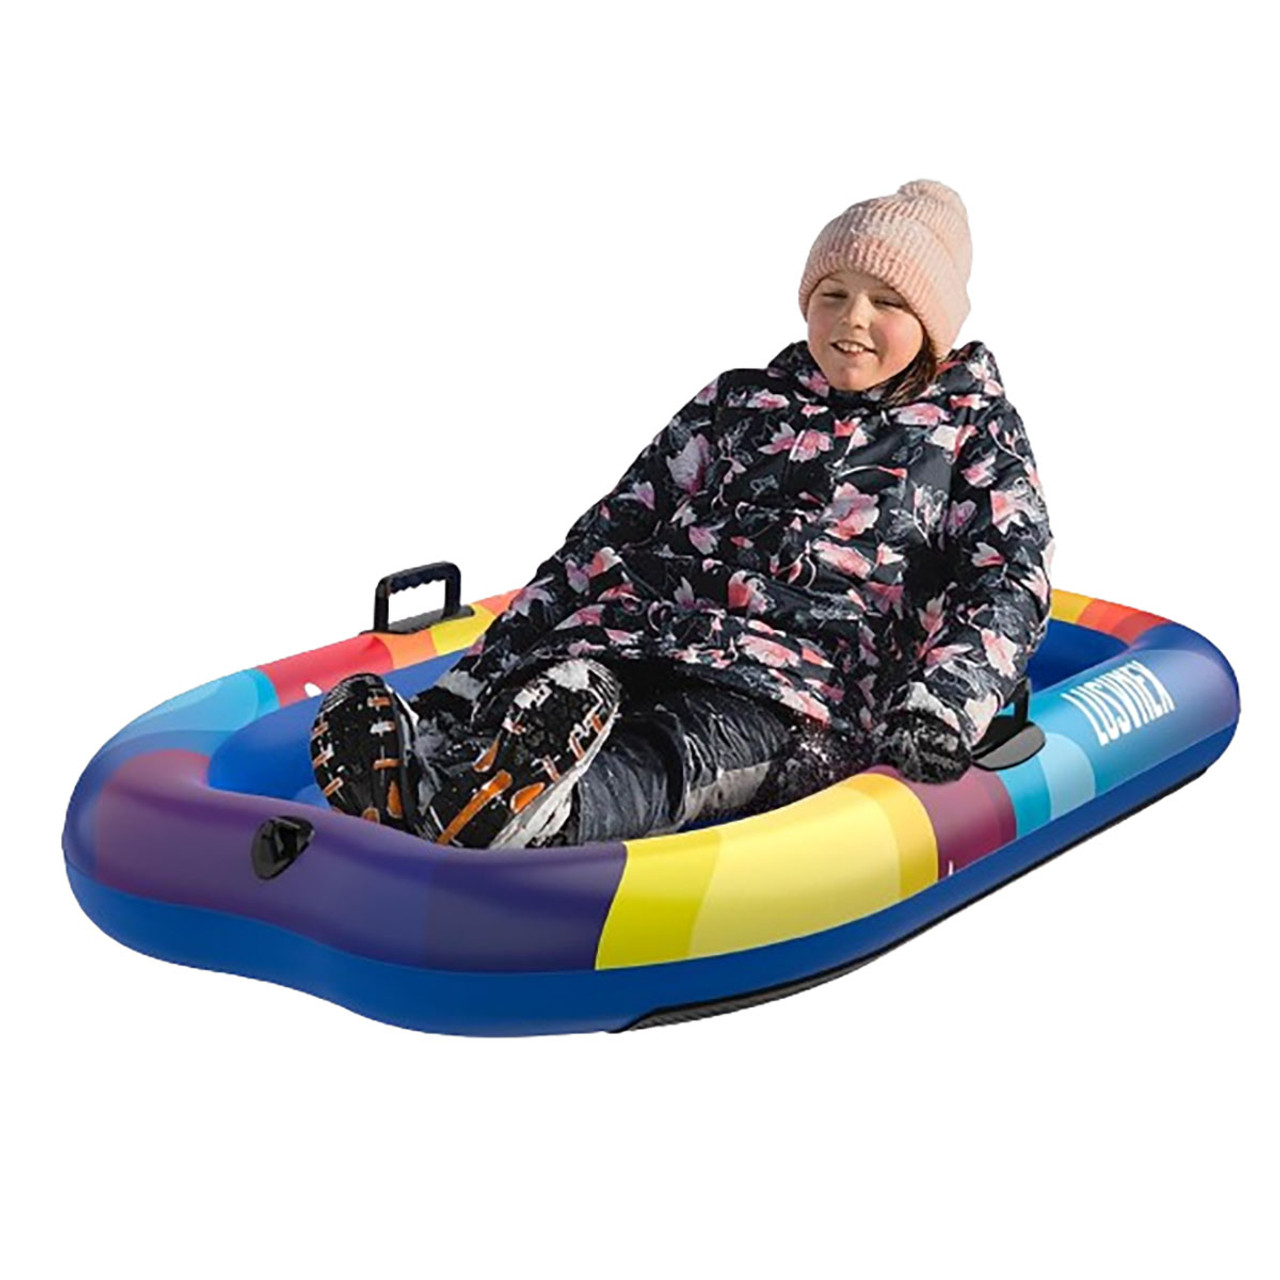 Kids' Heavy-Duty Inflatable Snow Sled with Anti-Slip Strip product image